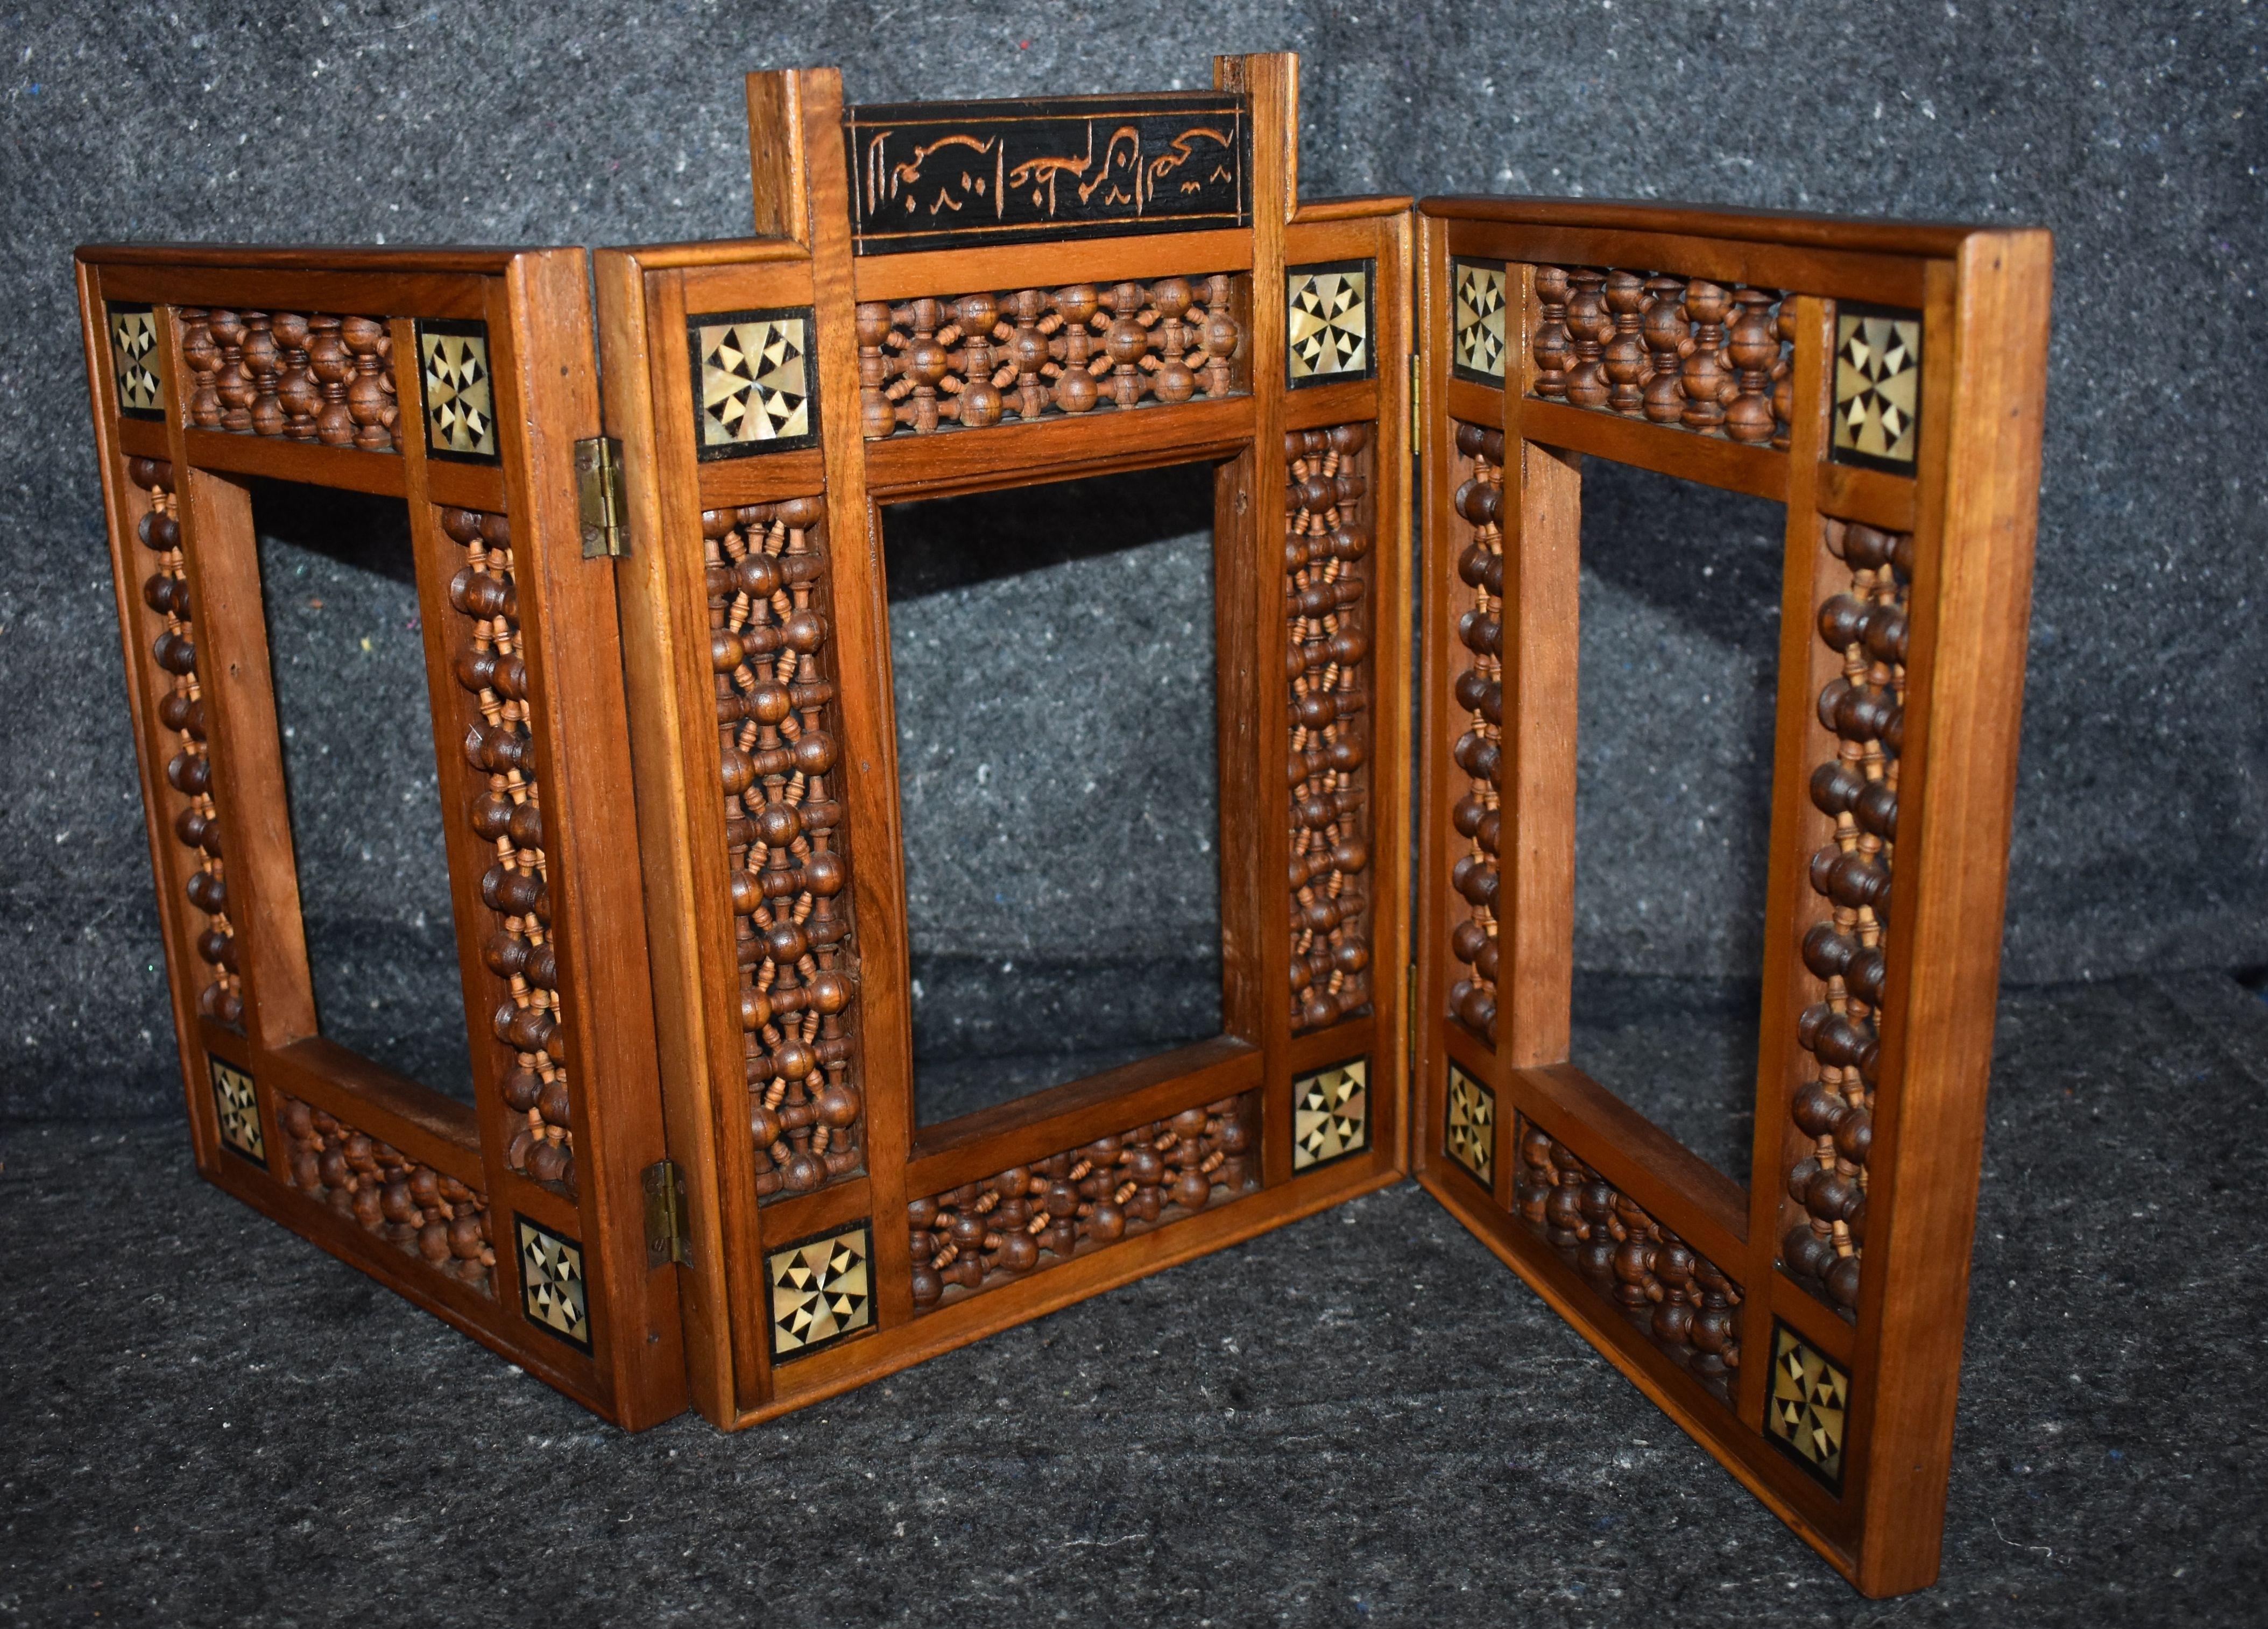 Antique wooden Syrian / Middle Eastern picture frames or mirror frame with turned Mashrabiya panels and with mother of pearl inlays.

Dimension of each panel:
W 8.75 inches, D 0.75 inch, H 10.75 inches.